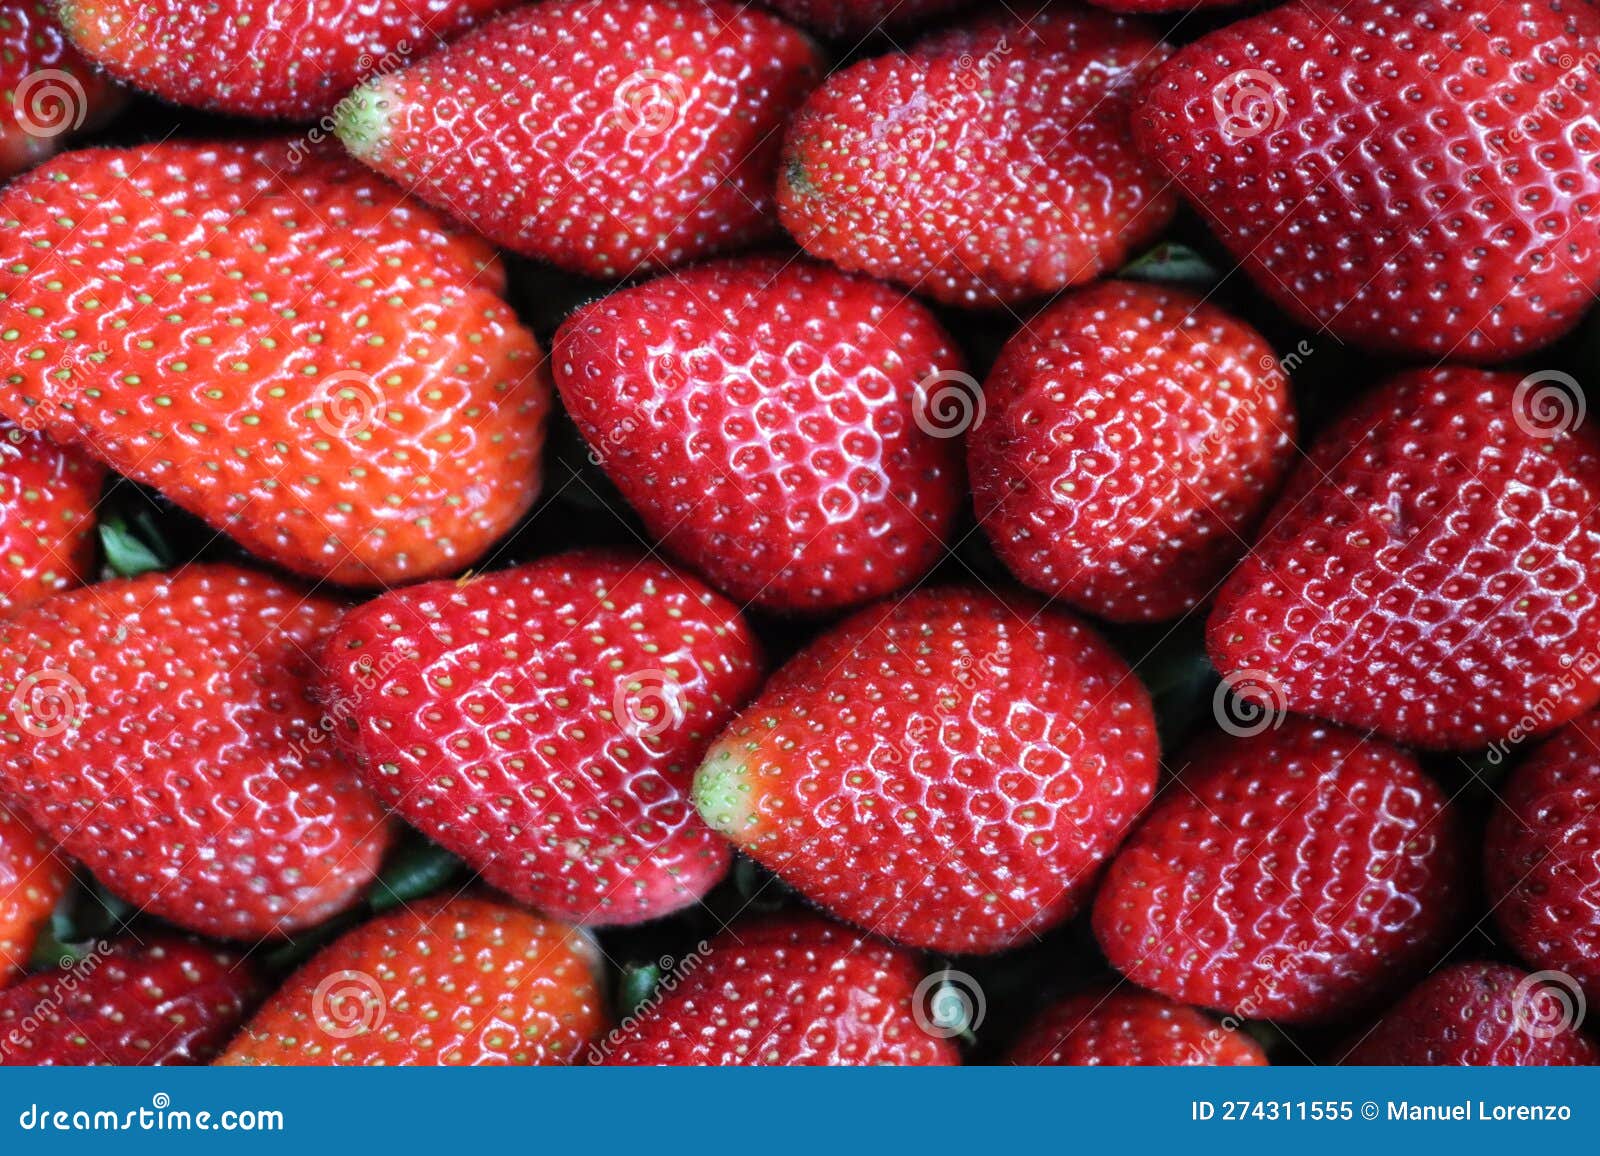 delicious strawberries fresh fruits natural seeds dessert red